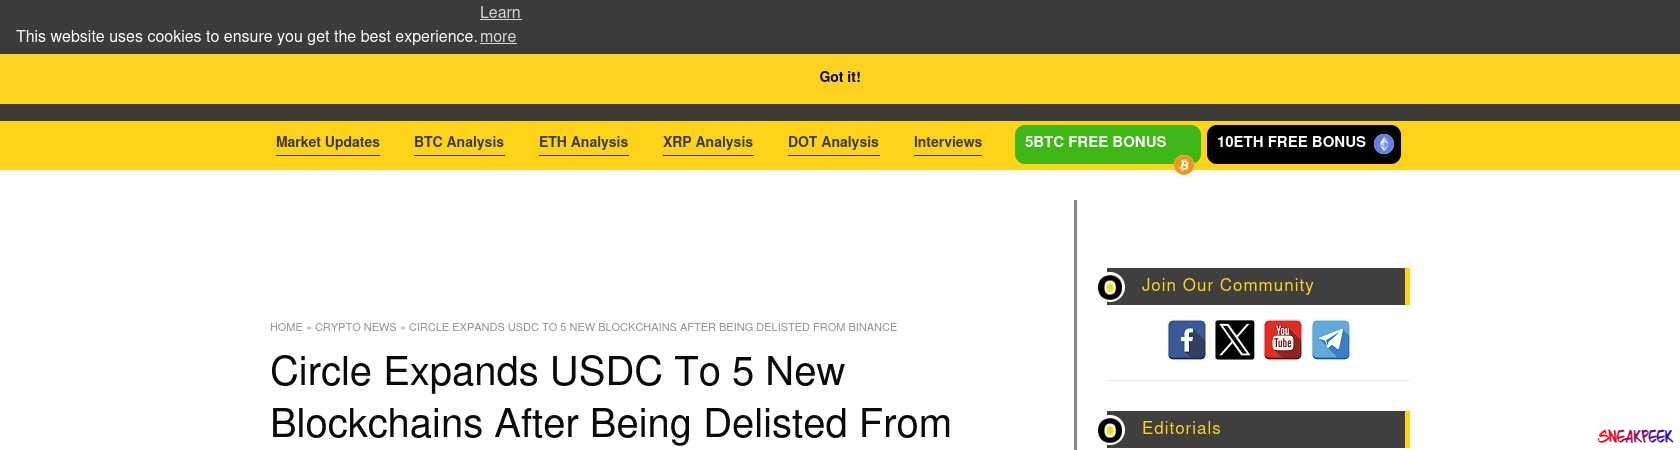 Read the full Article:  ⭲ Circle Expands USDC To 5 New Blockchains After Being Delisted From Binance